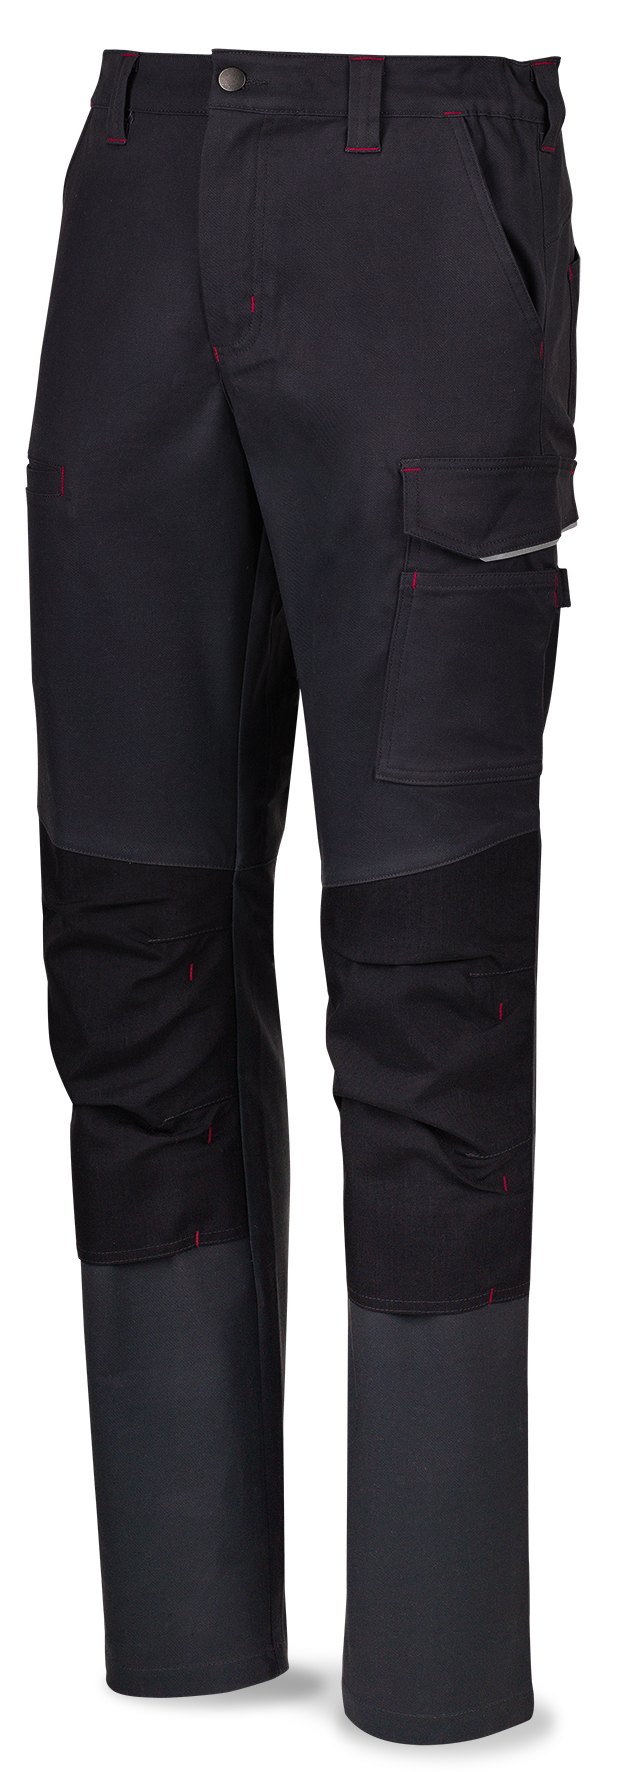 588PSSAM Workwear Pro Series STRETCH navy blue polyester/cotton pants 245 gr. Multipocket